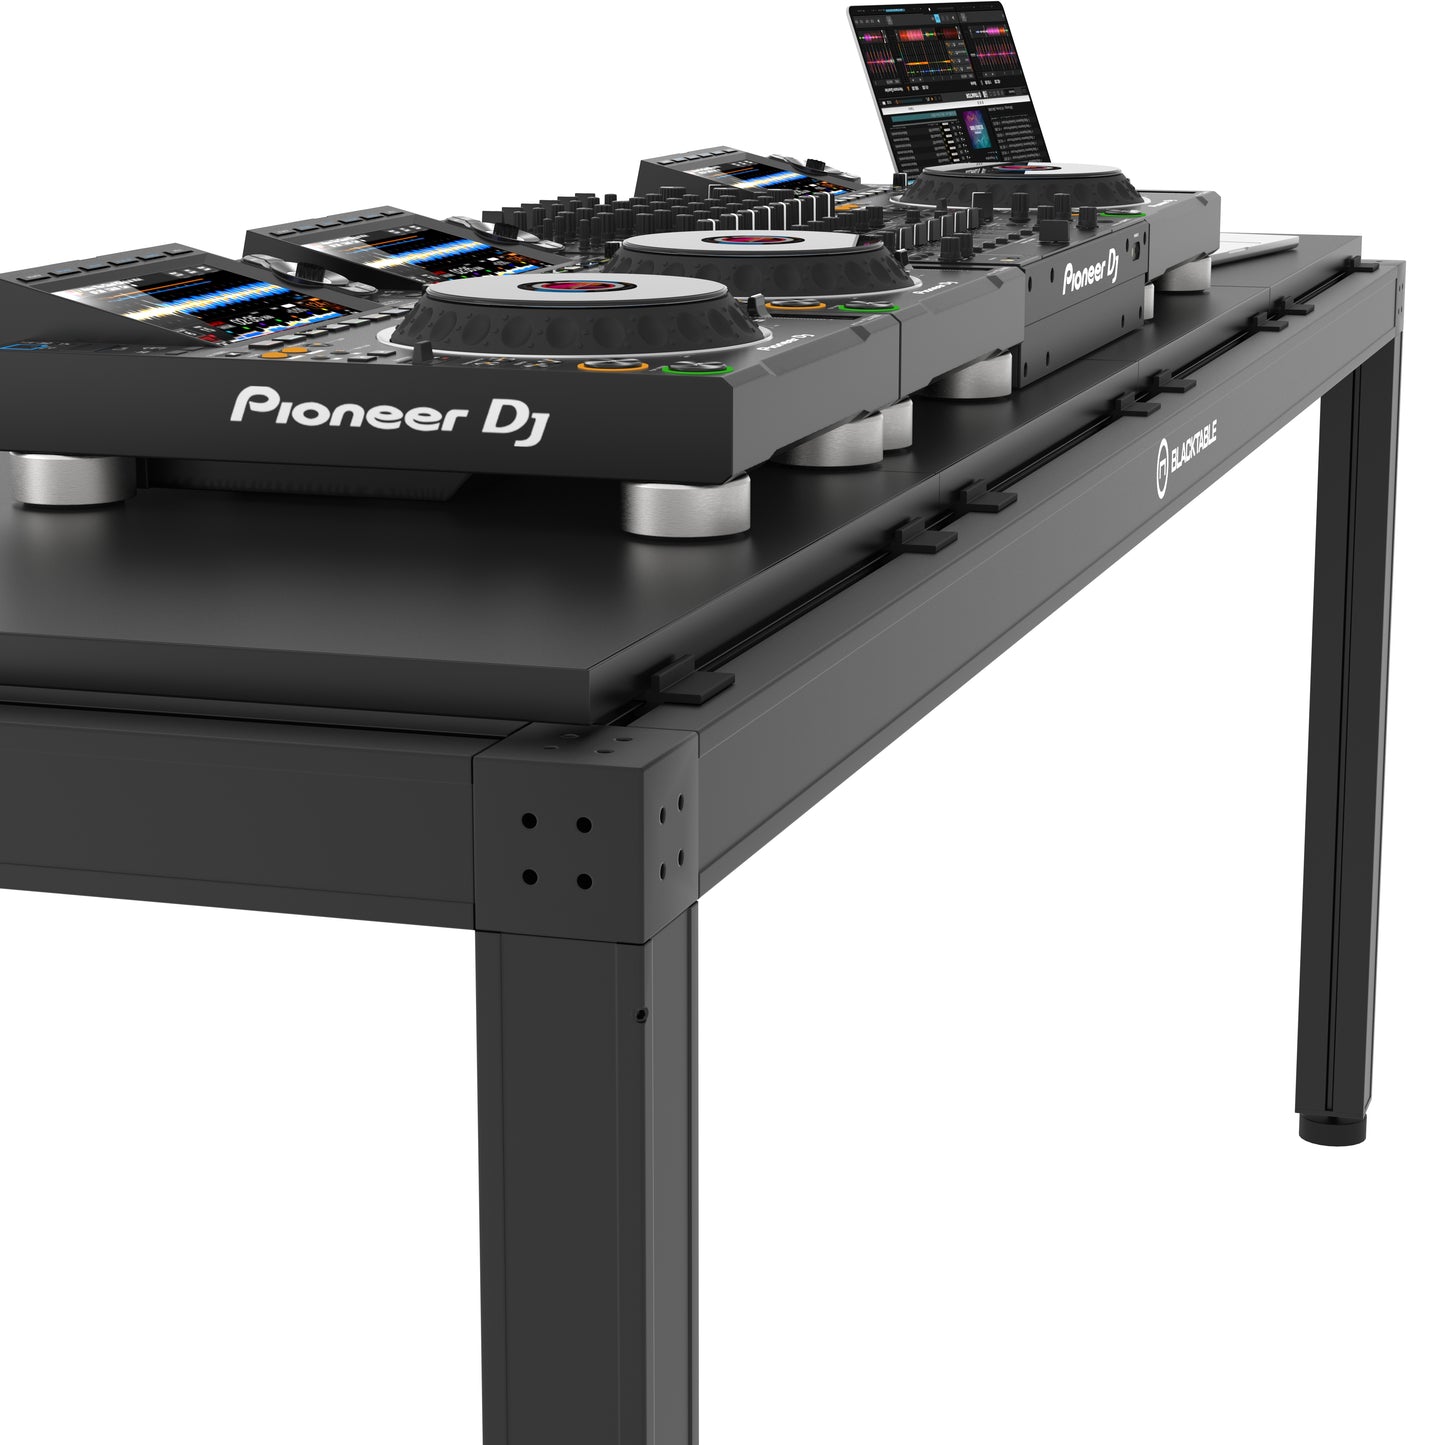 The Blacktable 240 DJ Table is a professional-grade table designed to last. Its connectors are made of solid aluminum and are attached with only one hexagonal screw, making it easy to connect and rebuild. The table has a streamlined design with no visible screws or connections and is built to be durable and long-lasting.